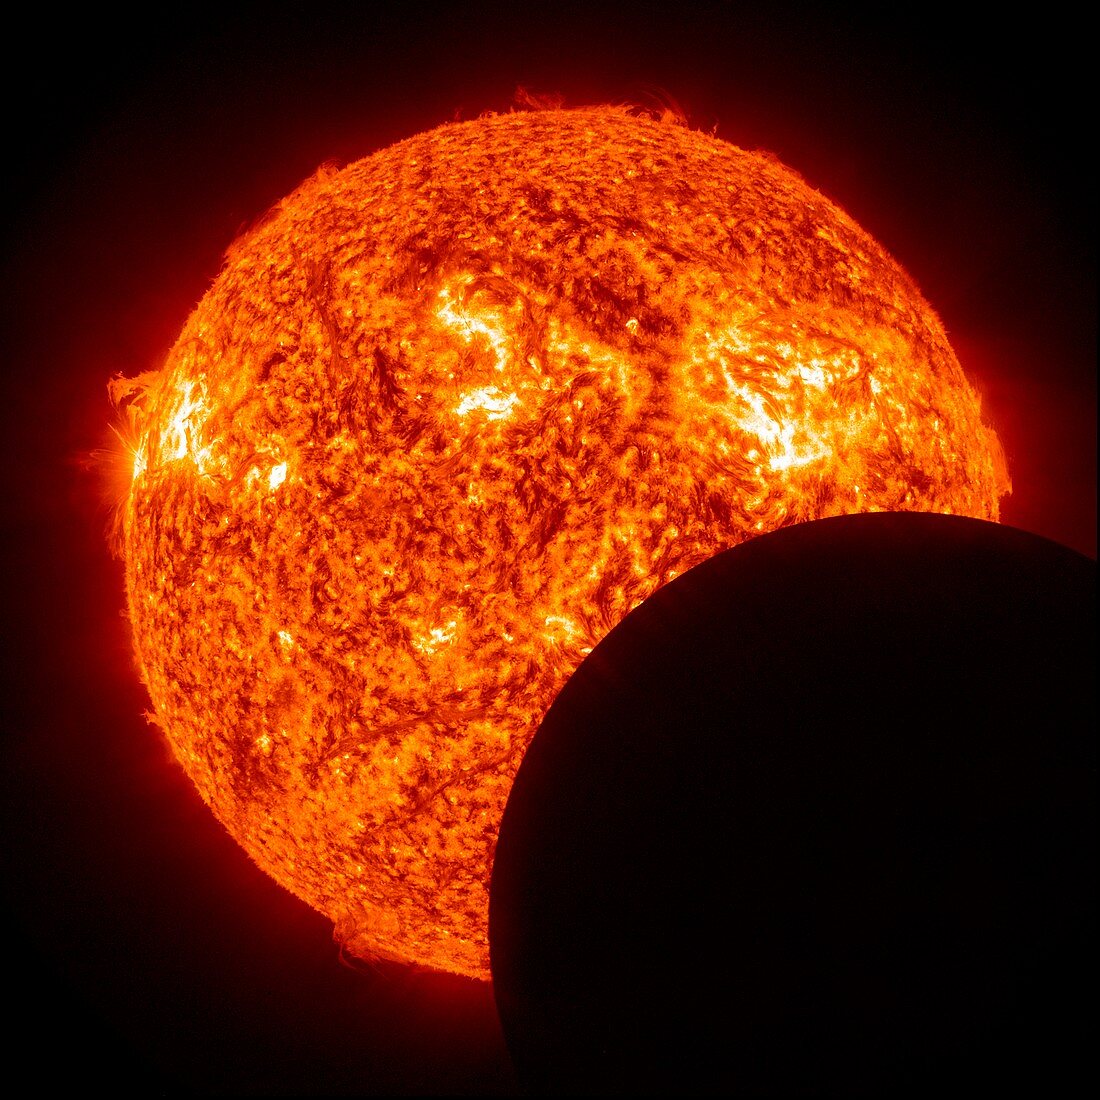 Moon transiting the Sun from the SDO